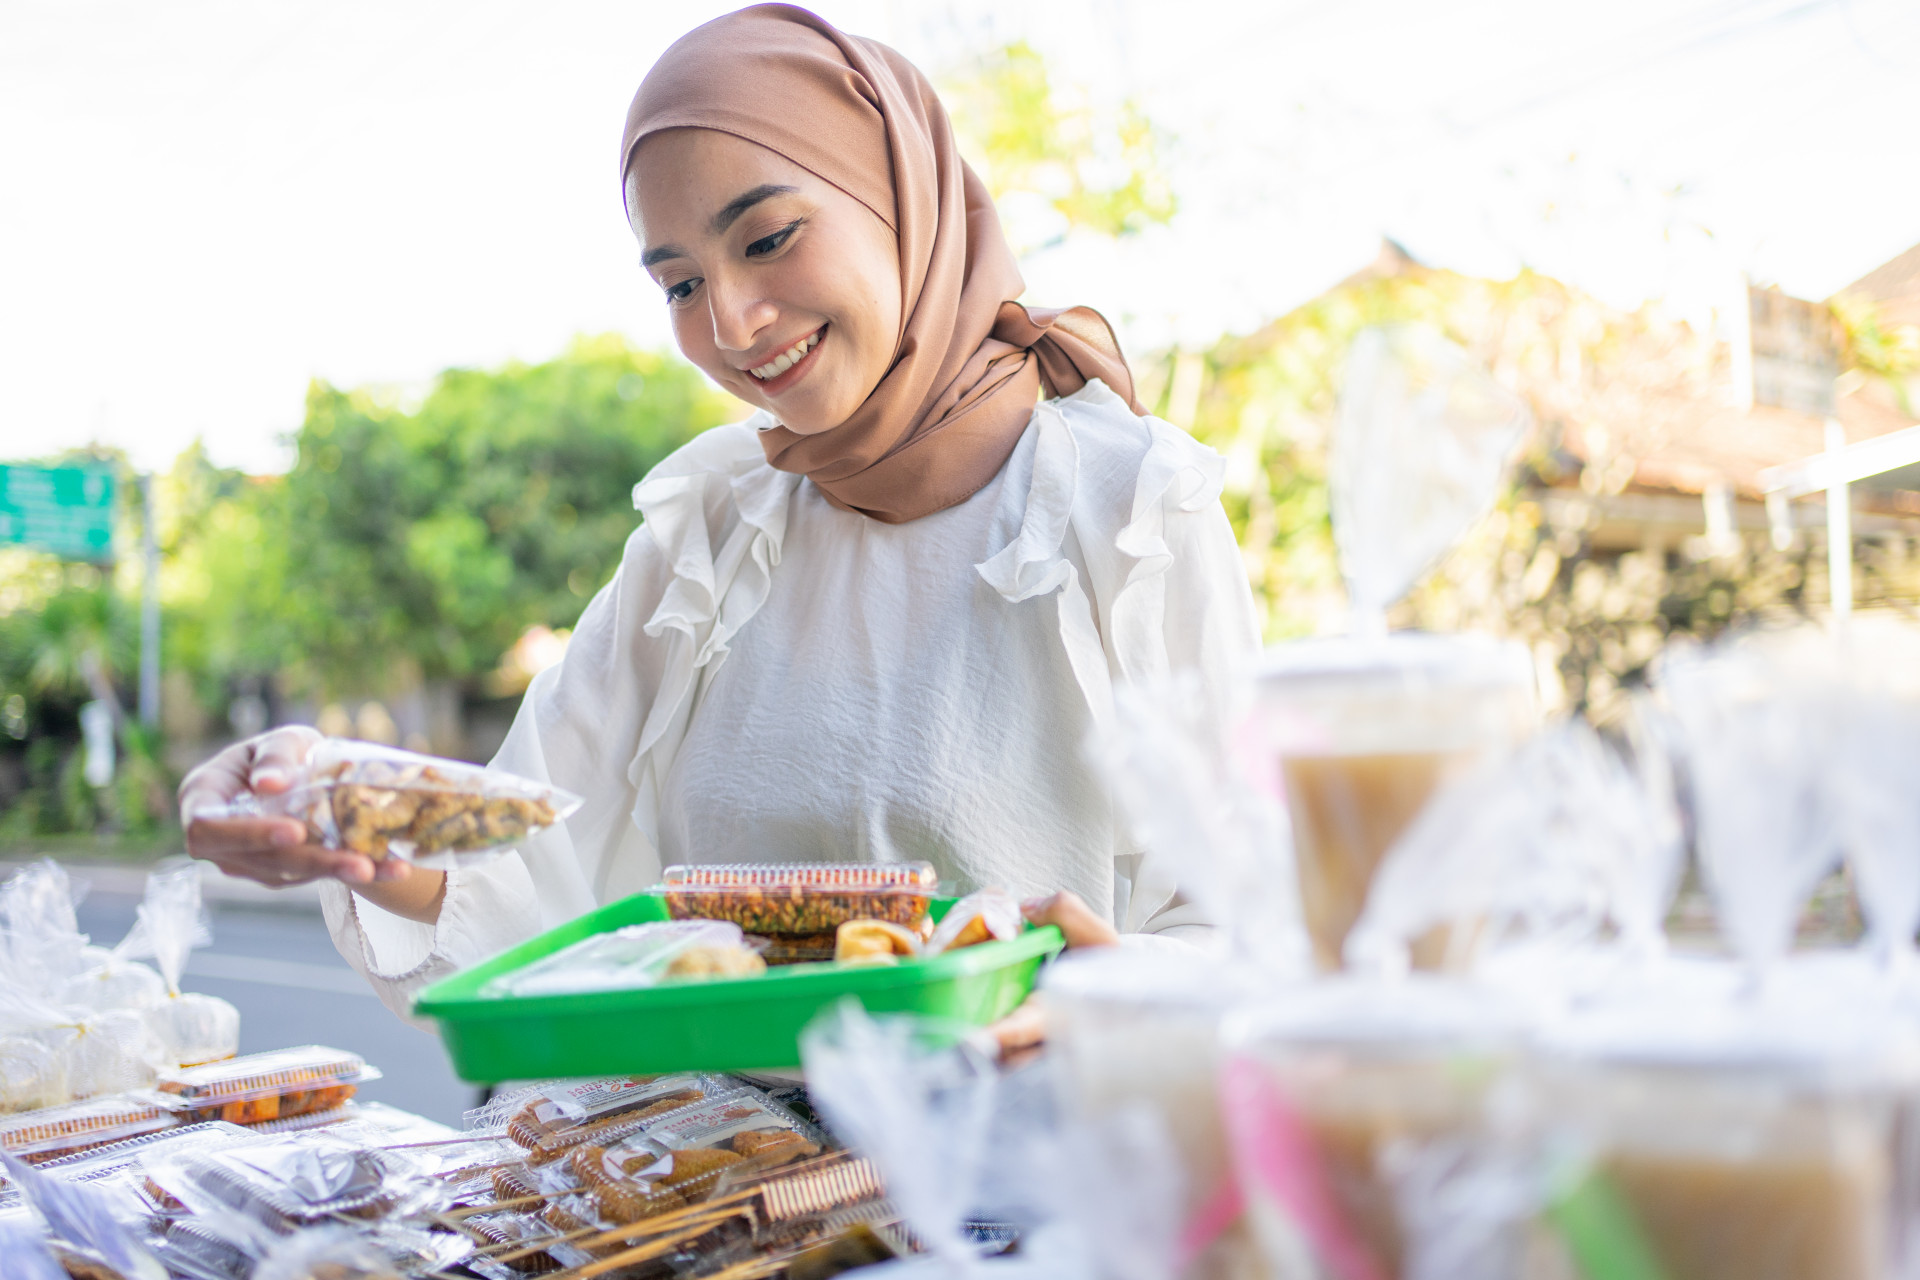 beautiful-girl-headscarf-holding-snack-wrapped-plastic-will-be-bought.jpg